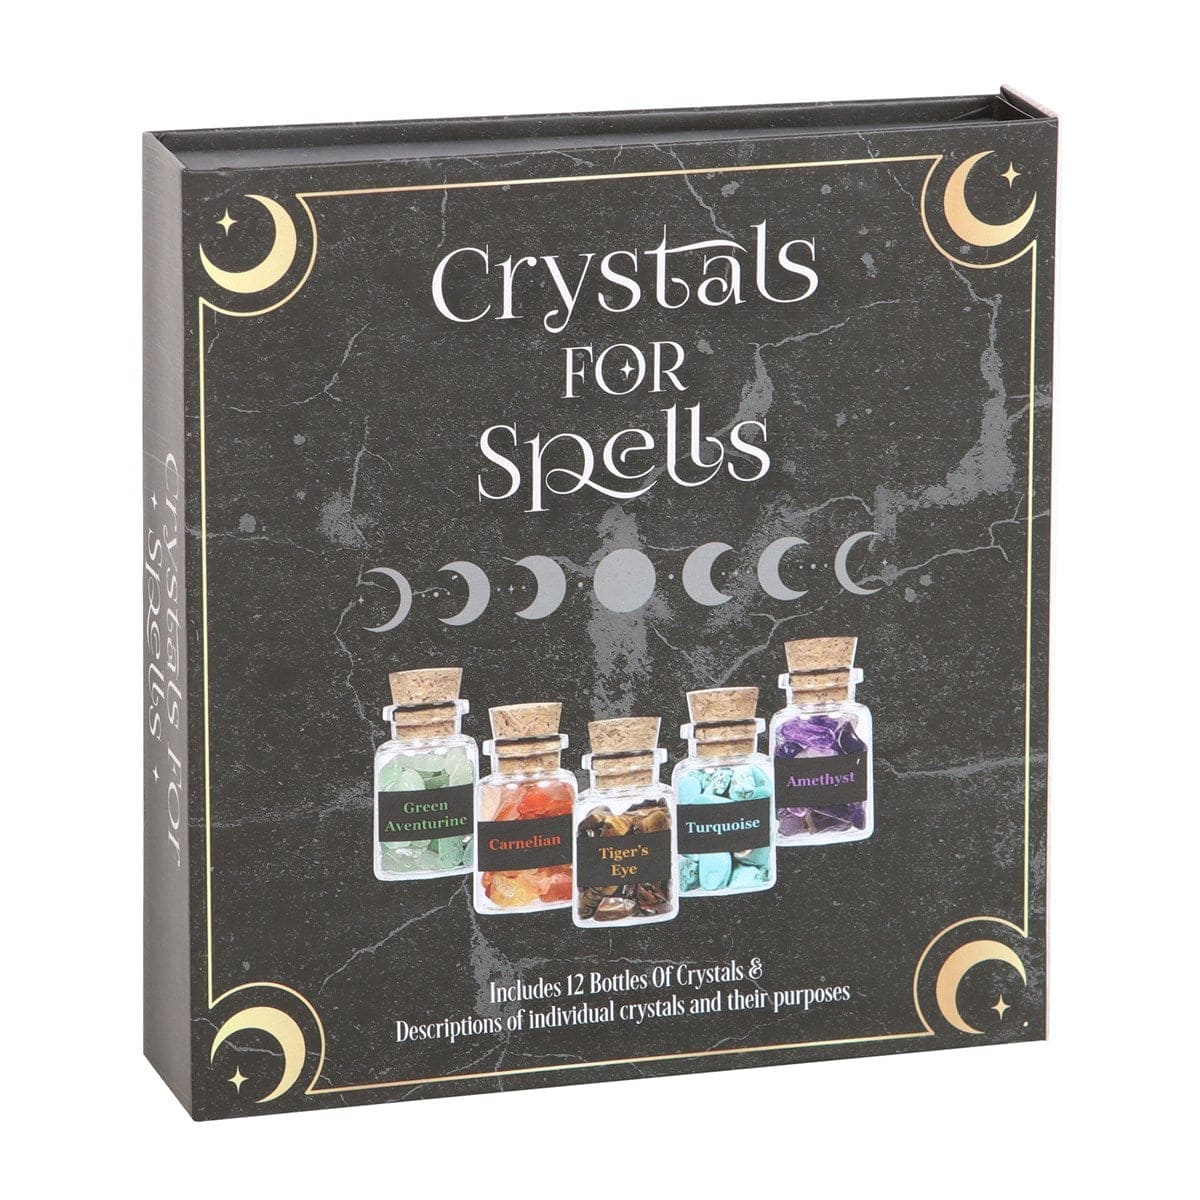 Crystals for Spells Crystal Chip Bottle Gift Set - Tumble stones by Spirit of equinox